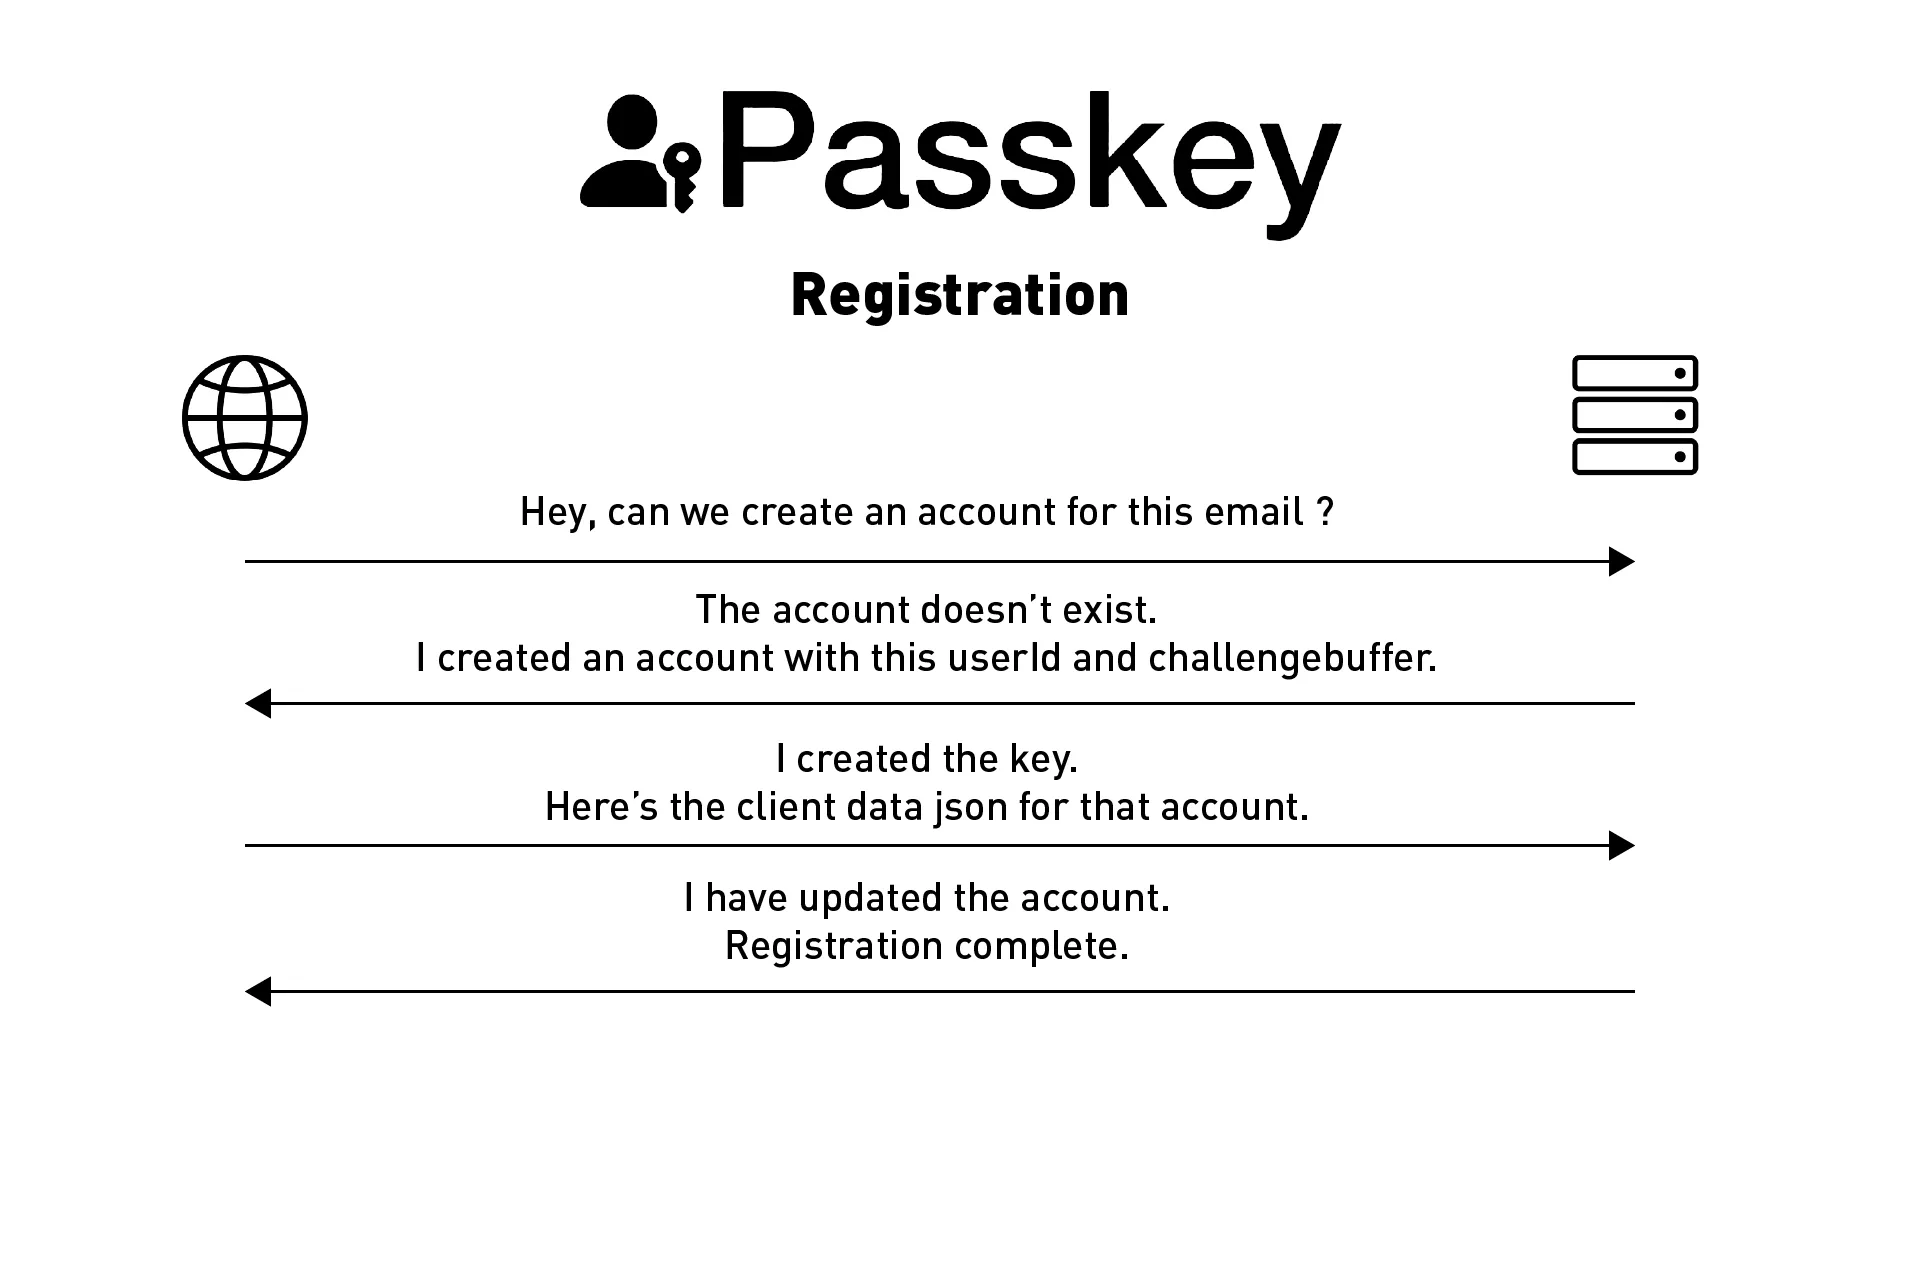 An image that shows the transfer of information between the server and the frontend required to create a Passkey. The process is outlined below.